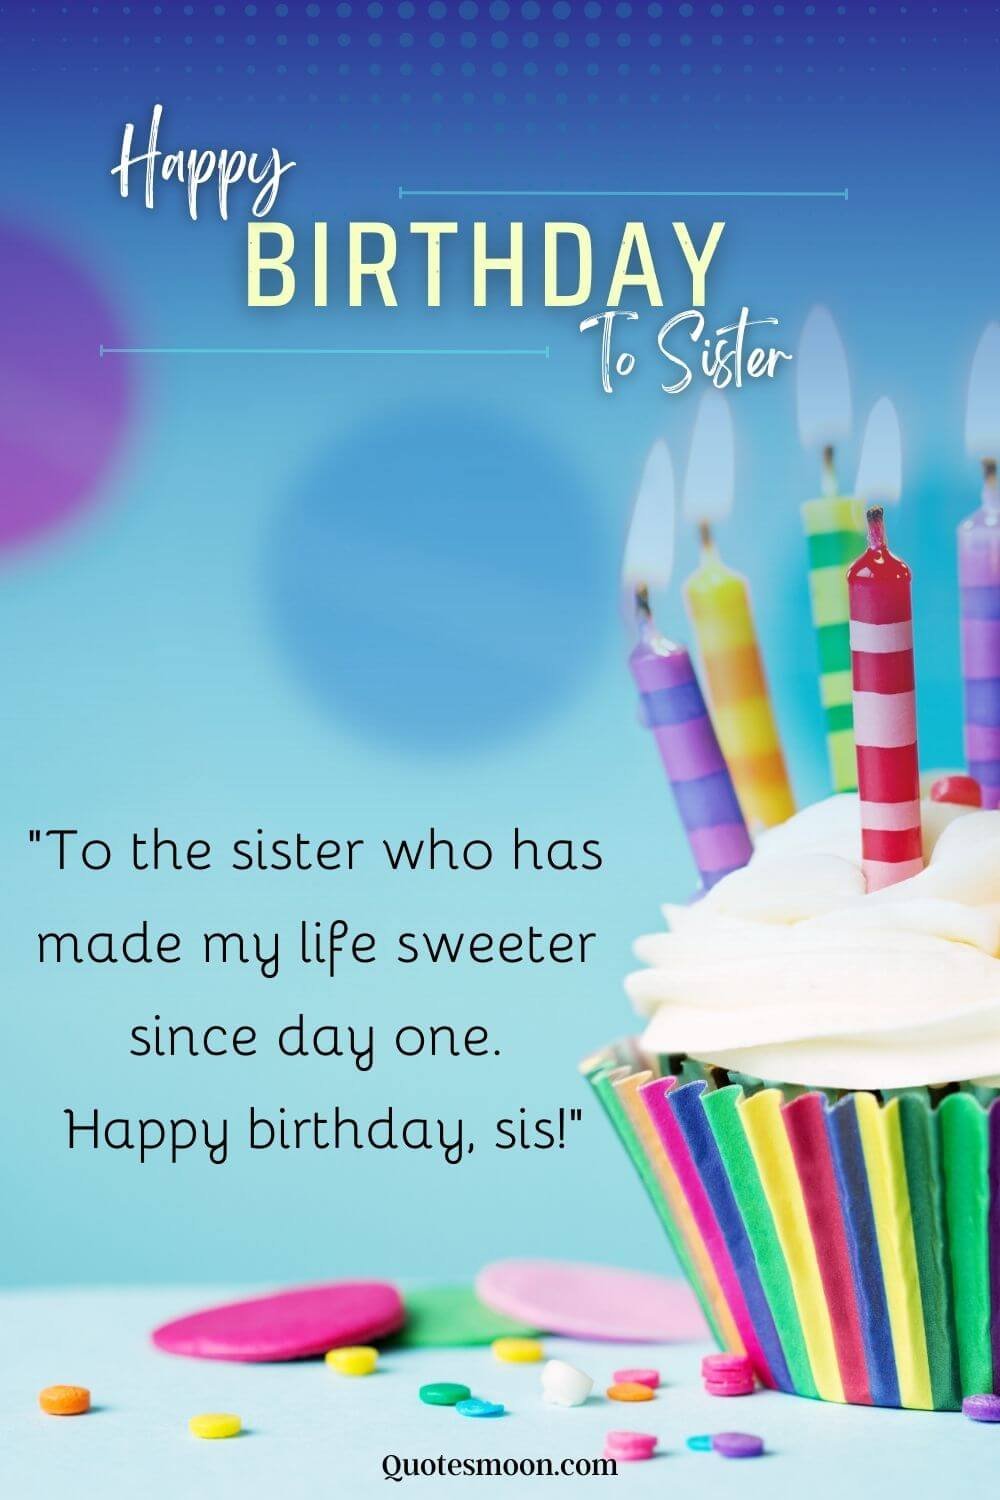 sister cake cutting wishes image download